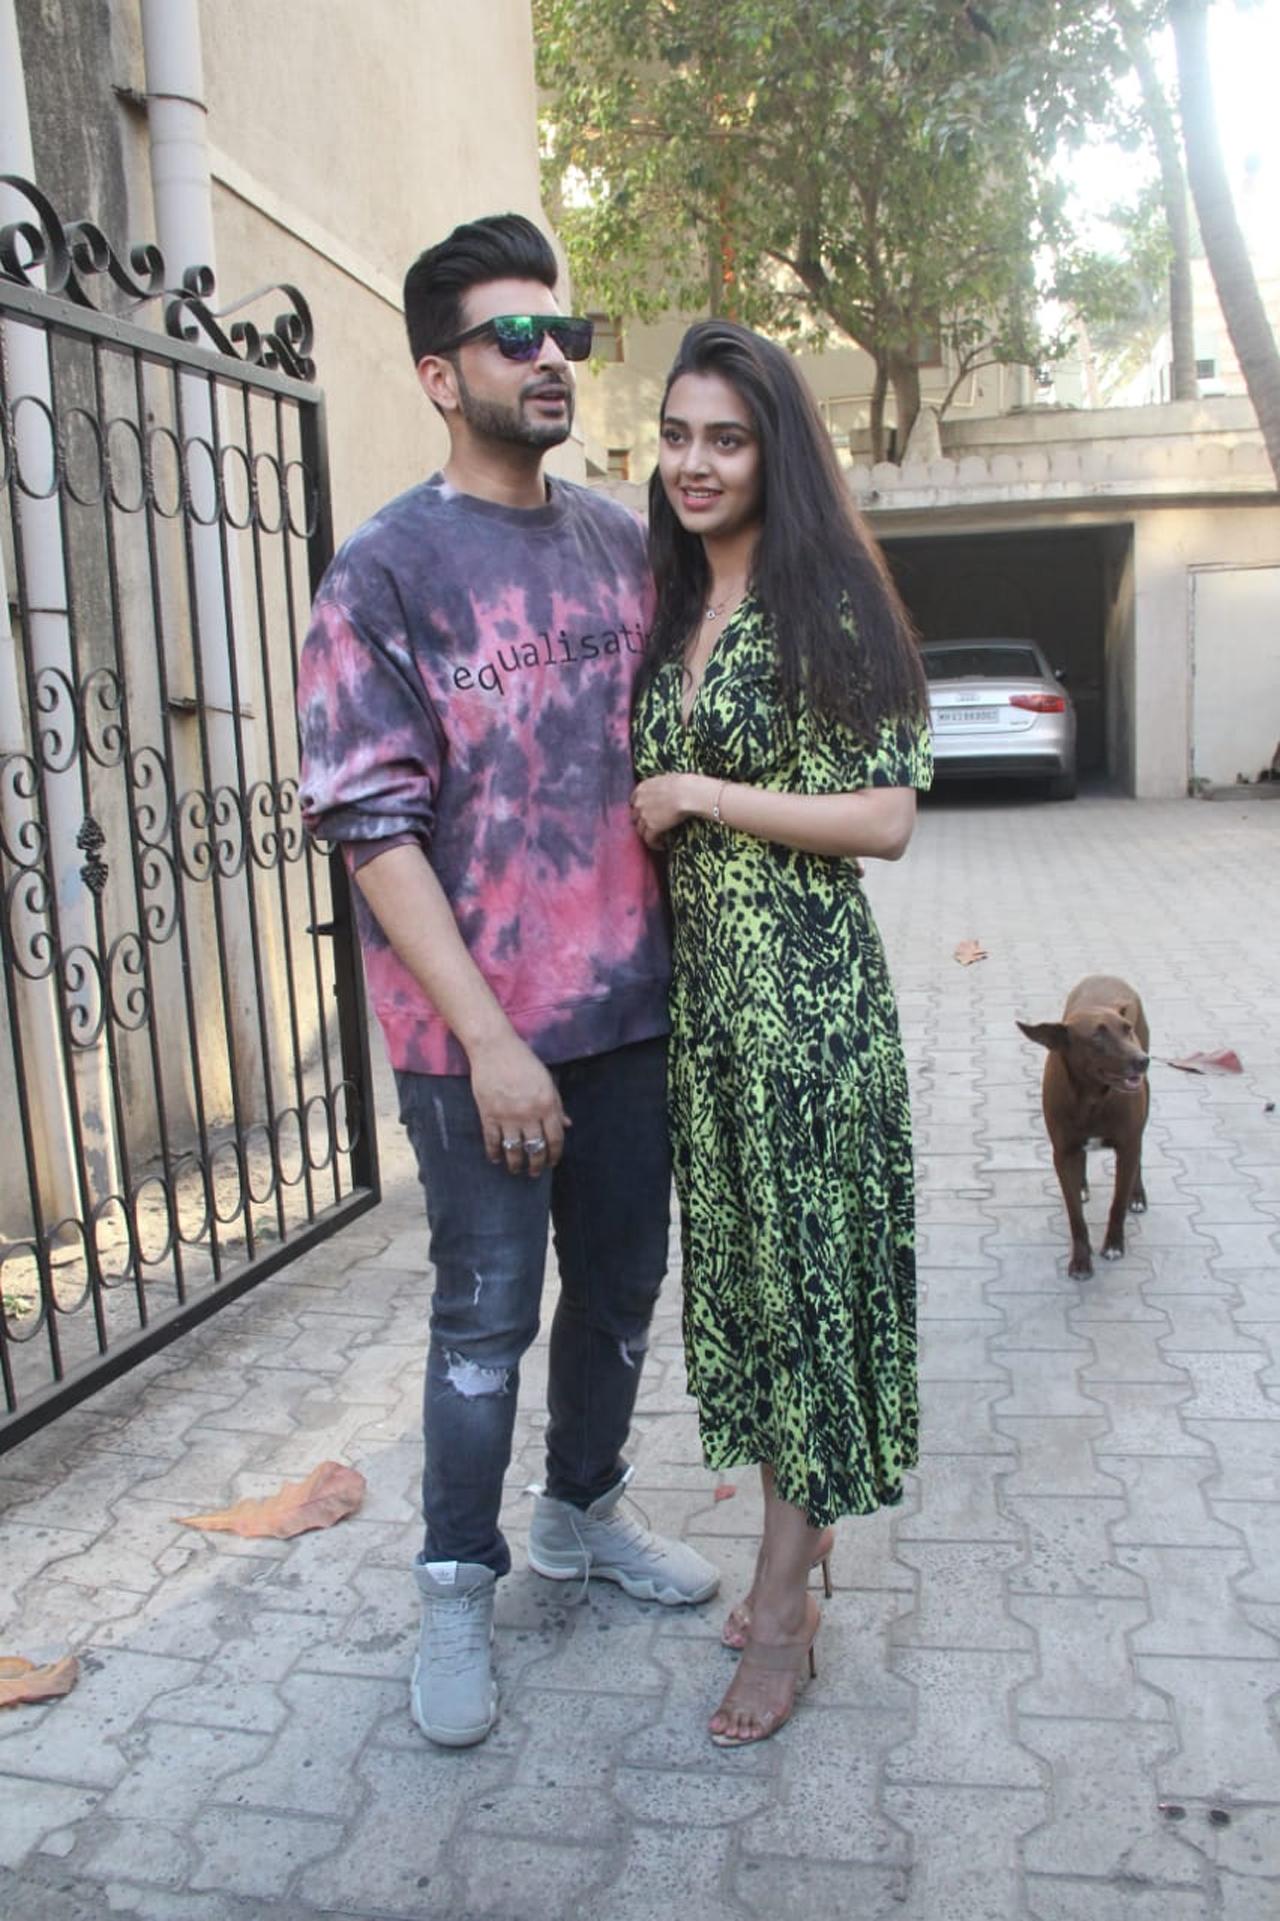 Karan Kundrra and Tejasswi Prakash became a household name after their stint in Bigg Boss 15. Karan and Tejasswi are the new lovebirds in the television fraternity. They developed a liking for each other in 'Bigg Boss 15' and soon fell in love. Even after coming out of the house, they are often spotted together.